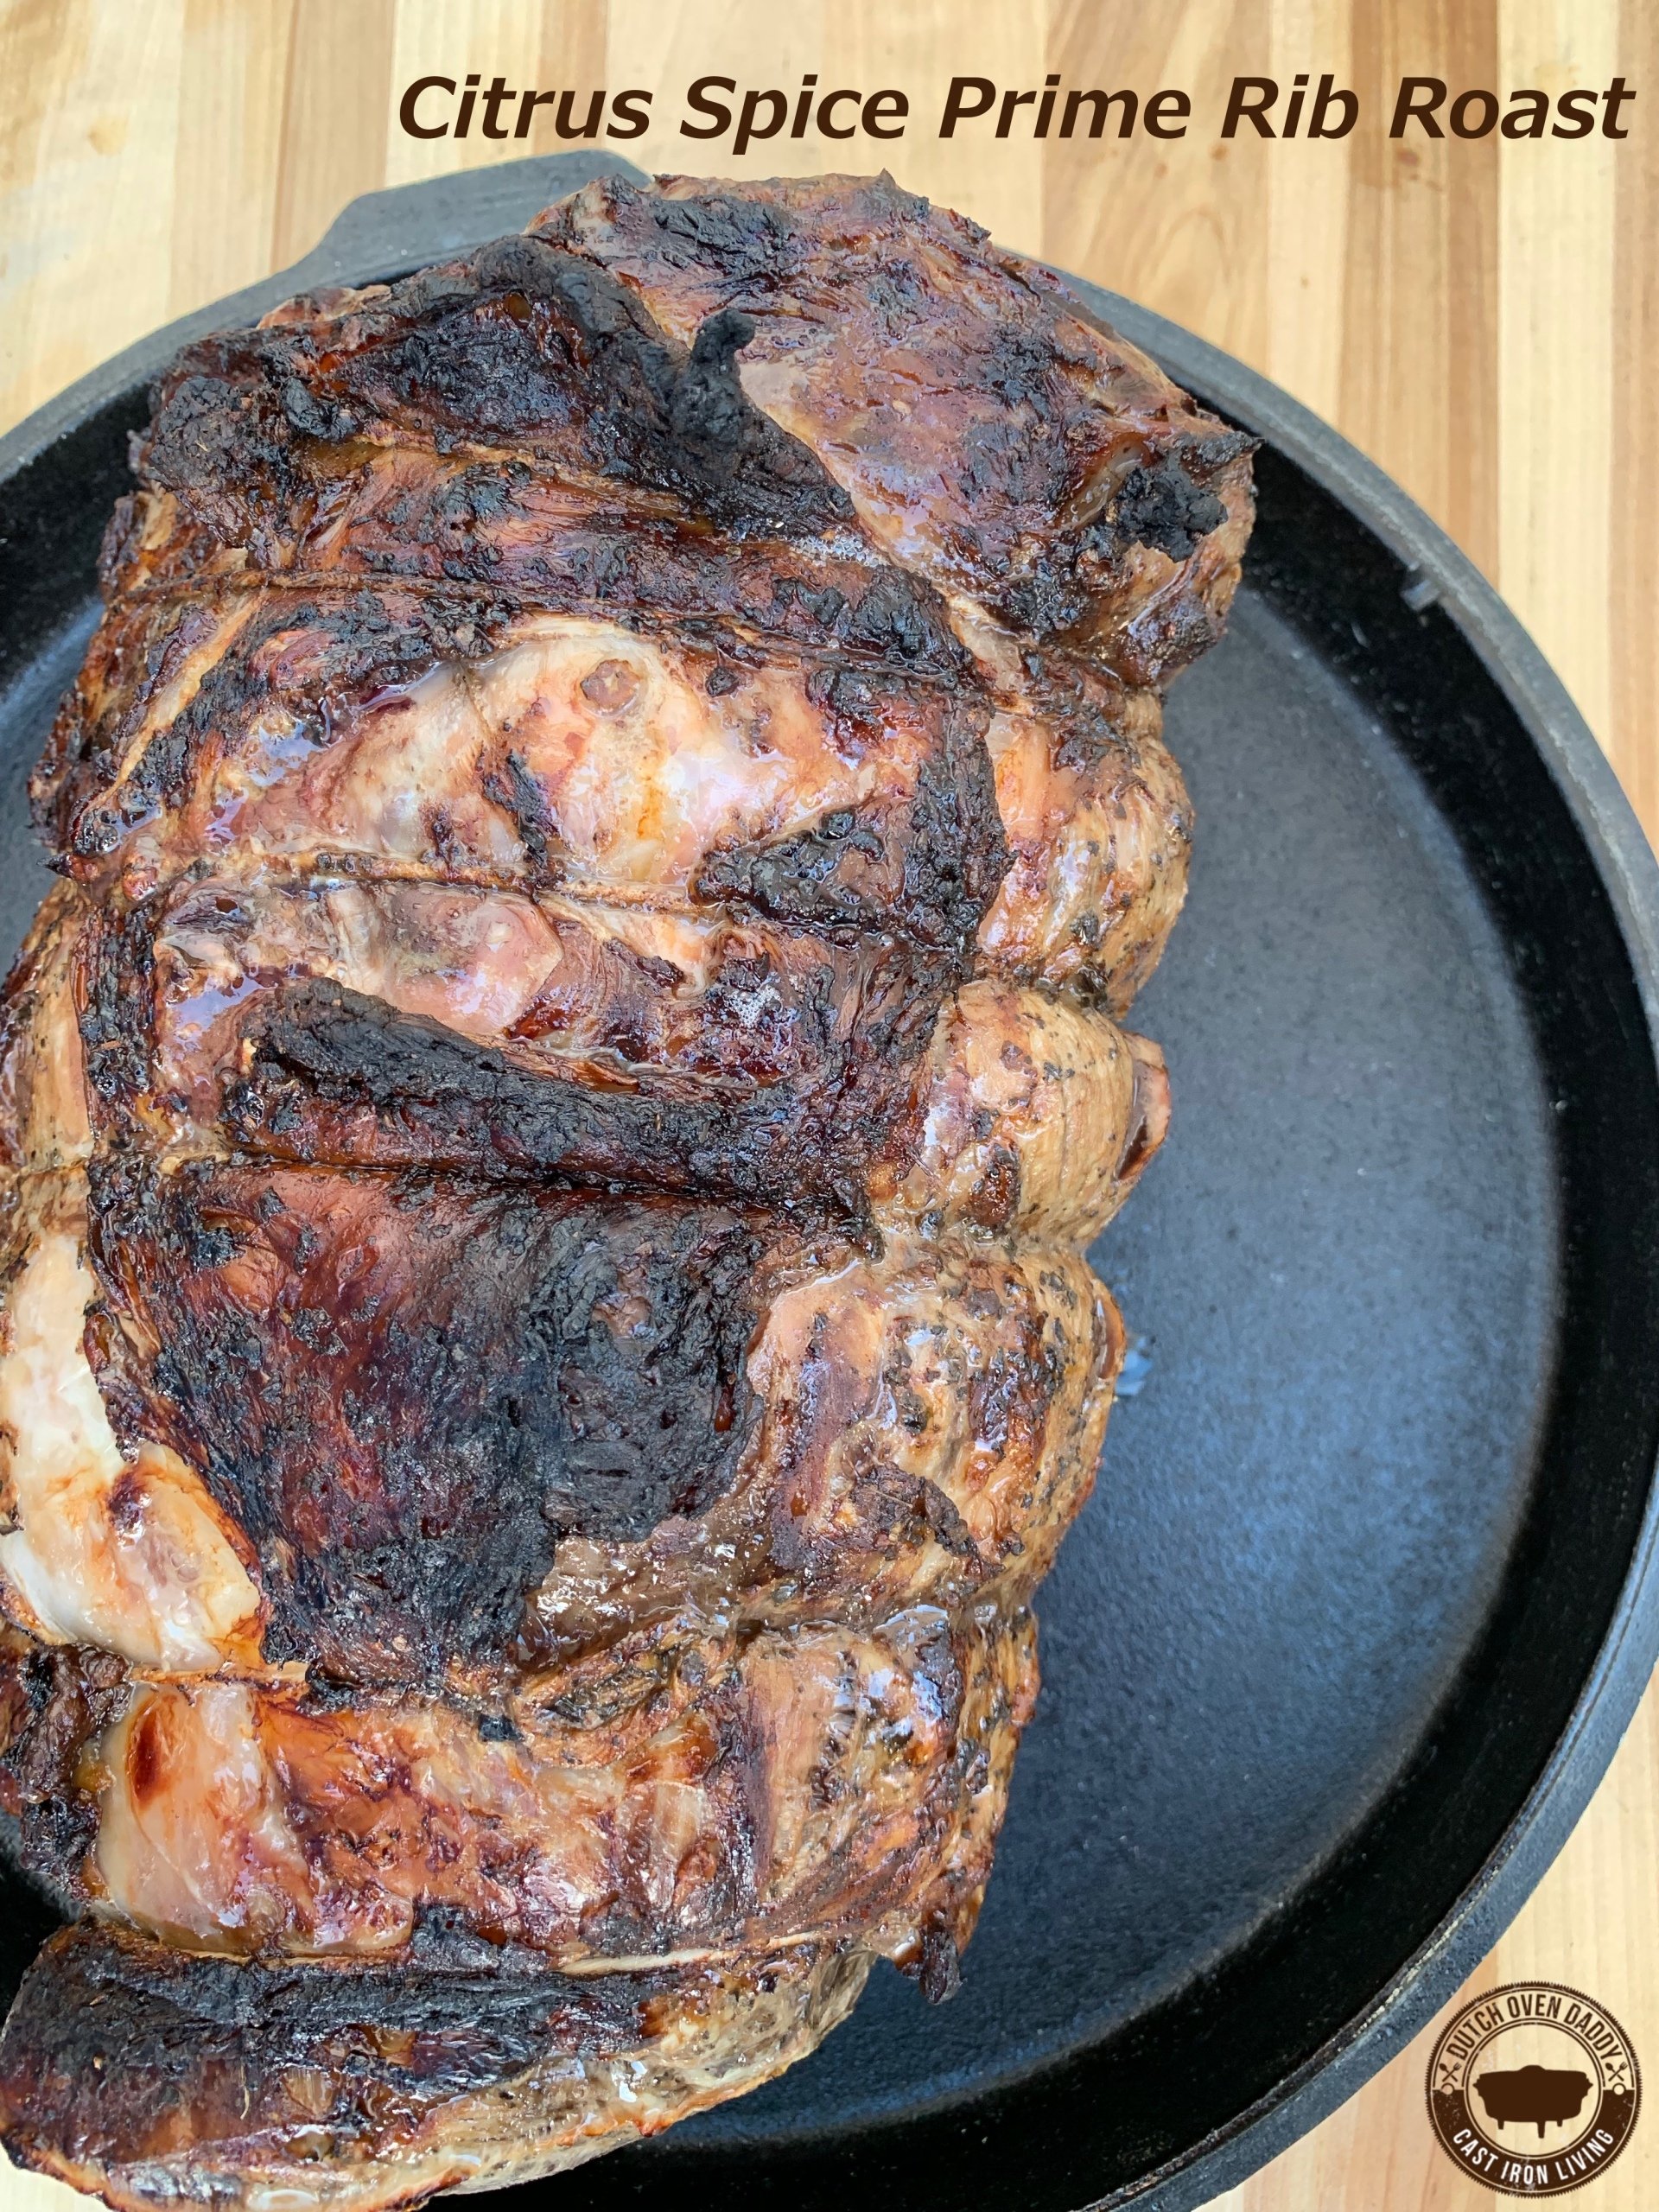 Citrus Spice Prime Rib Roast is a sure bet while hosting your holiday feast. Dutch Oven Daddy